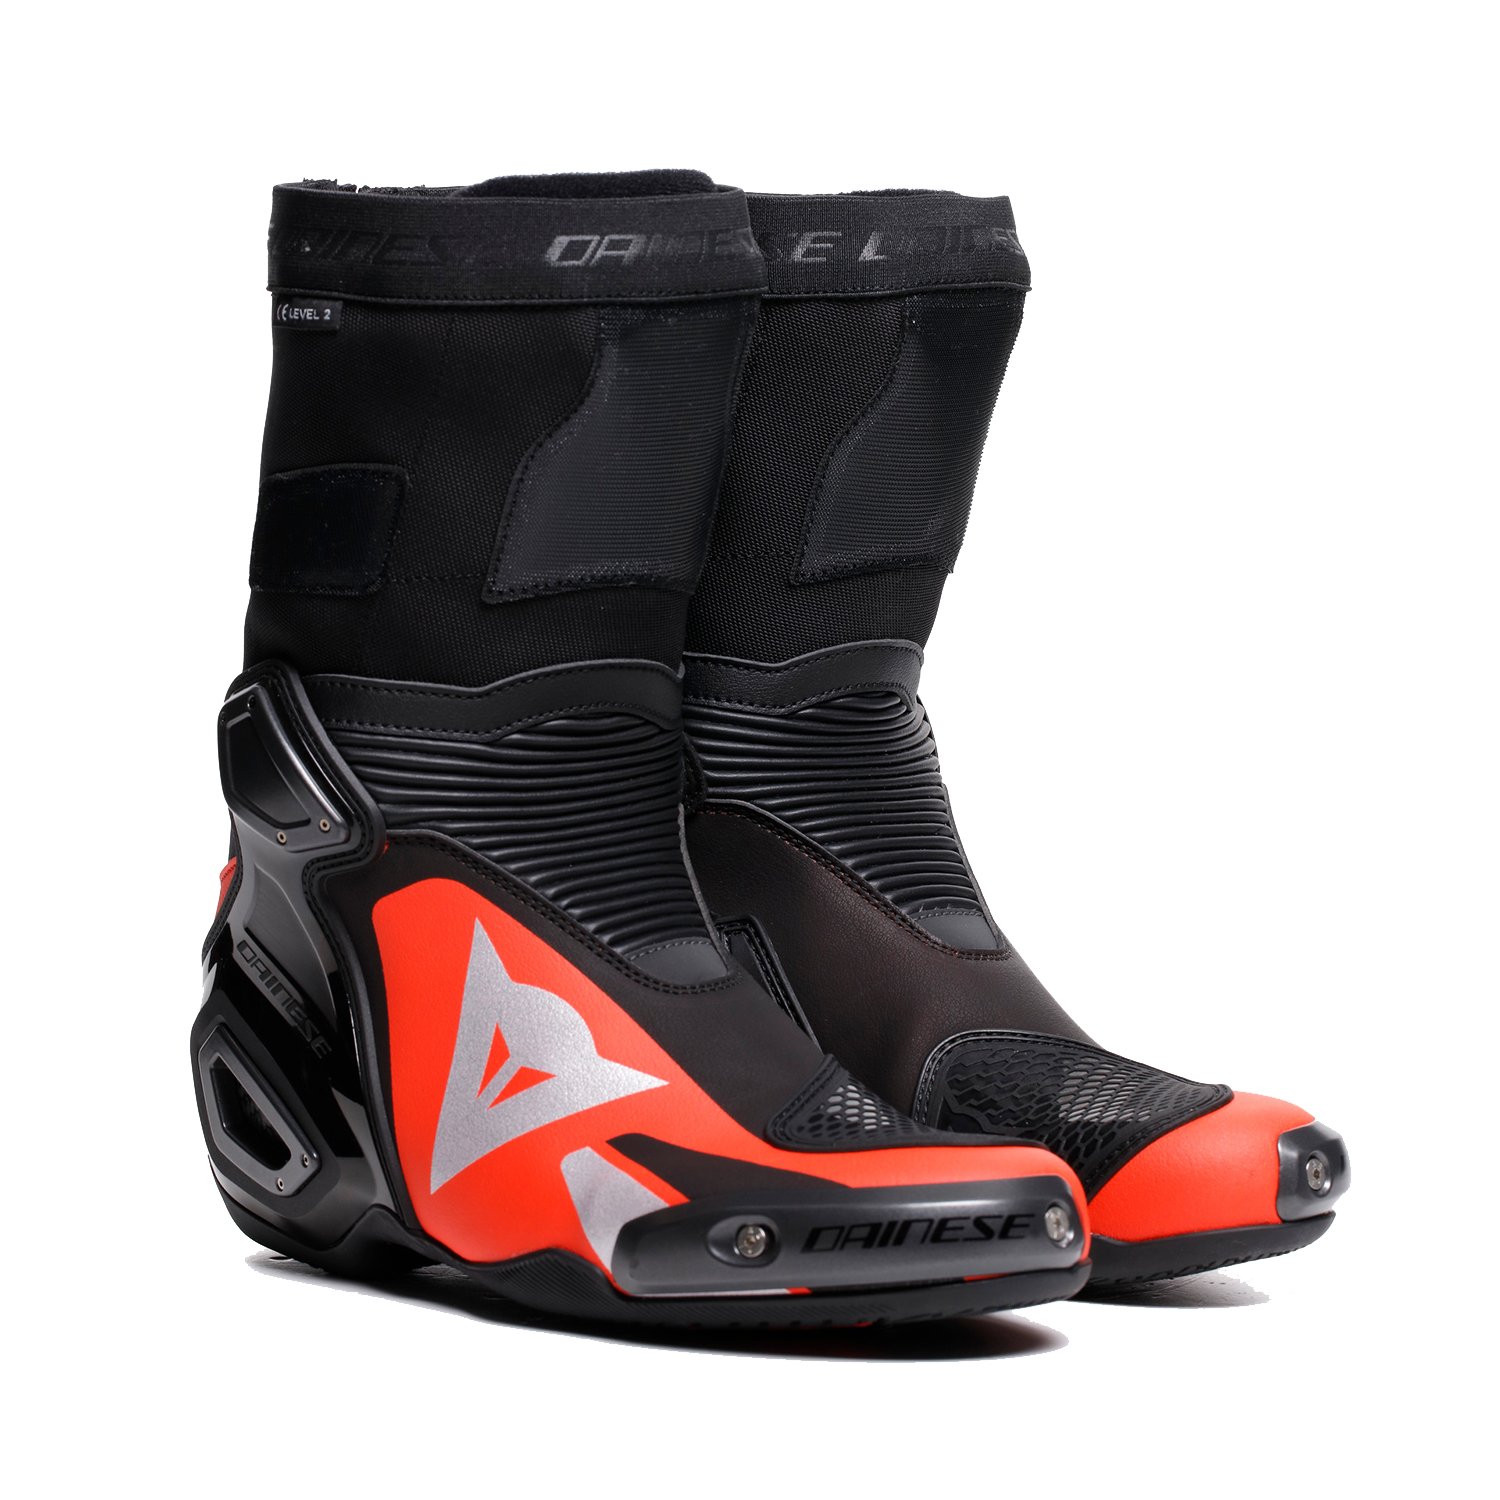 Image of Dainese Axial 2 Boots Black Red Fluo Größe 42